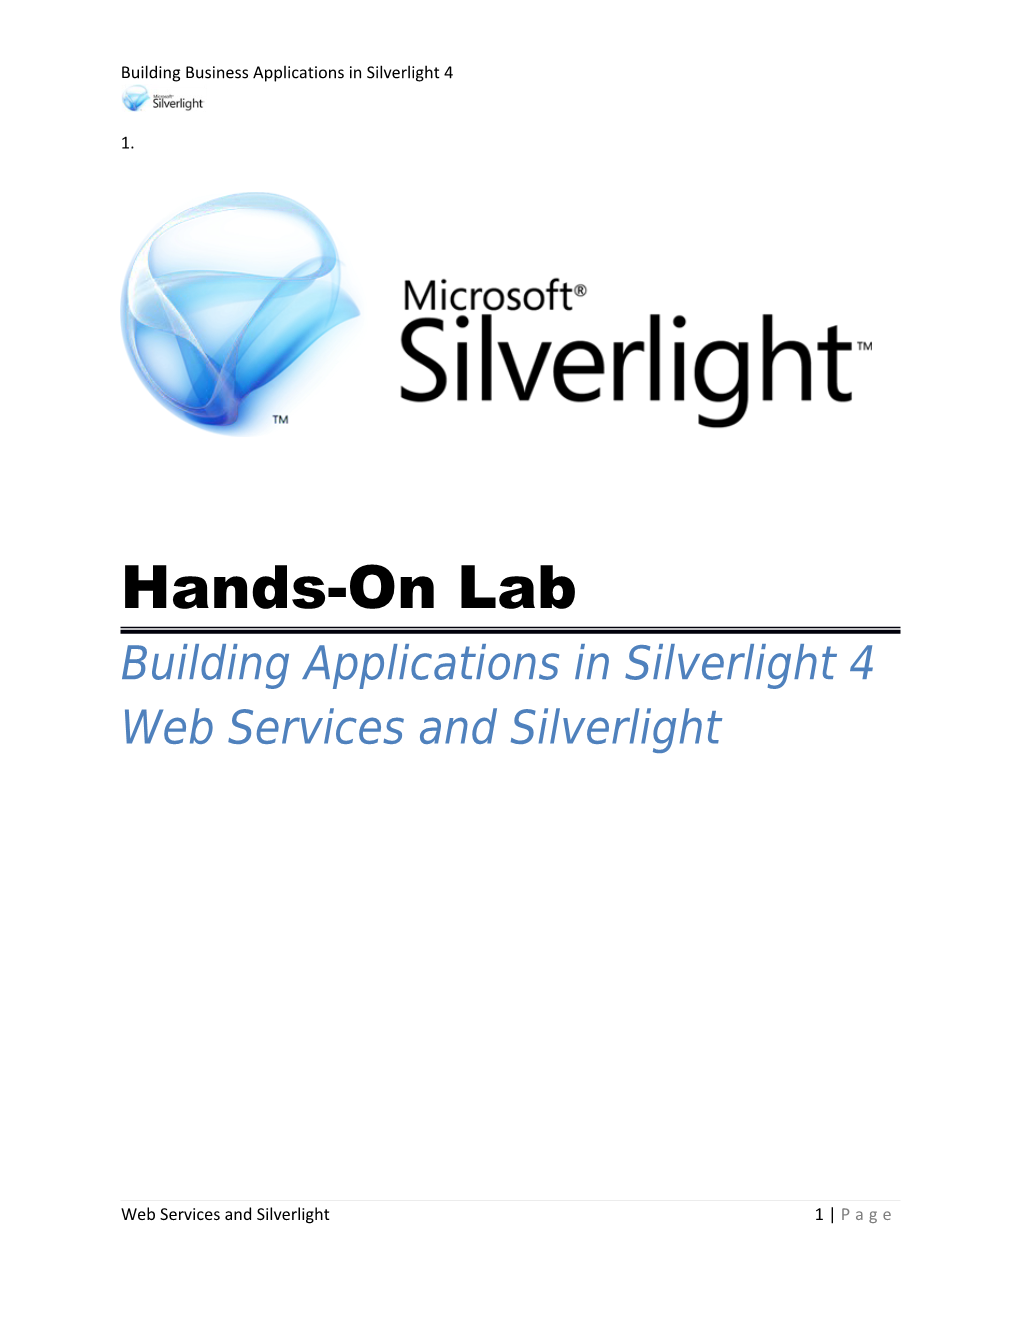 Web Services and Silverlight